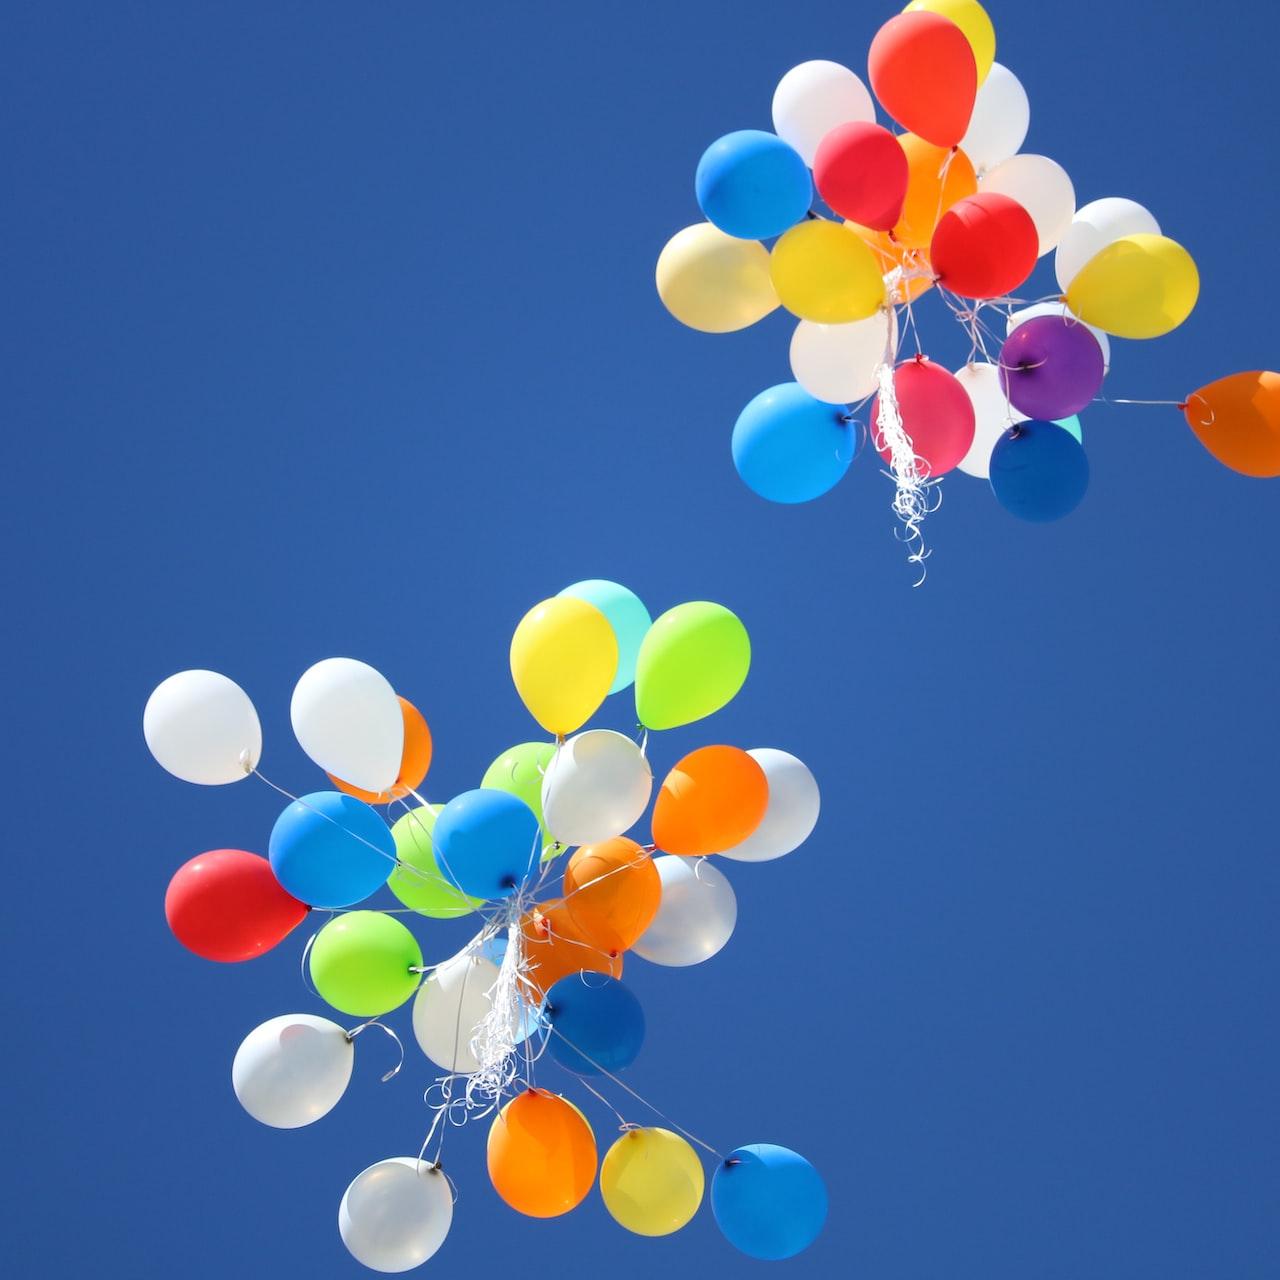 assorted-color balloons flying on sky during daytime